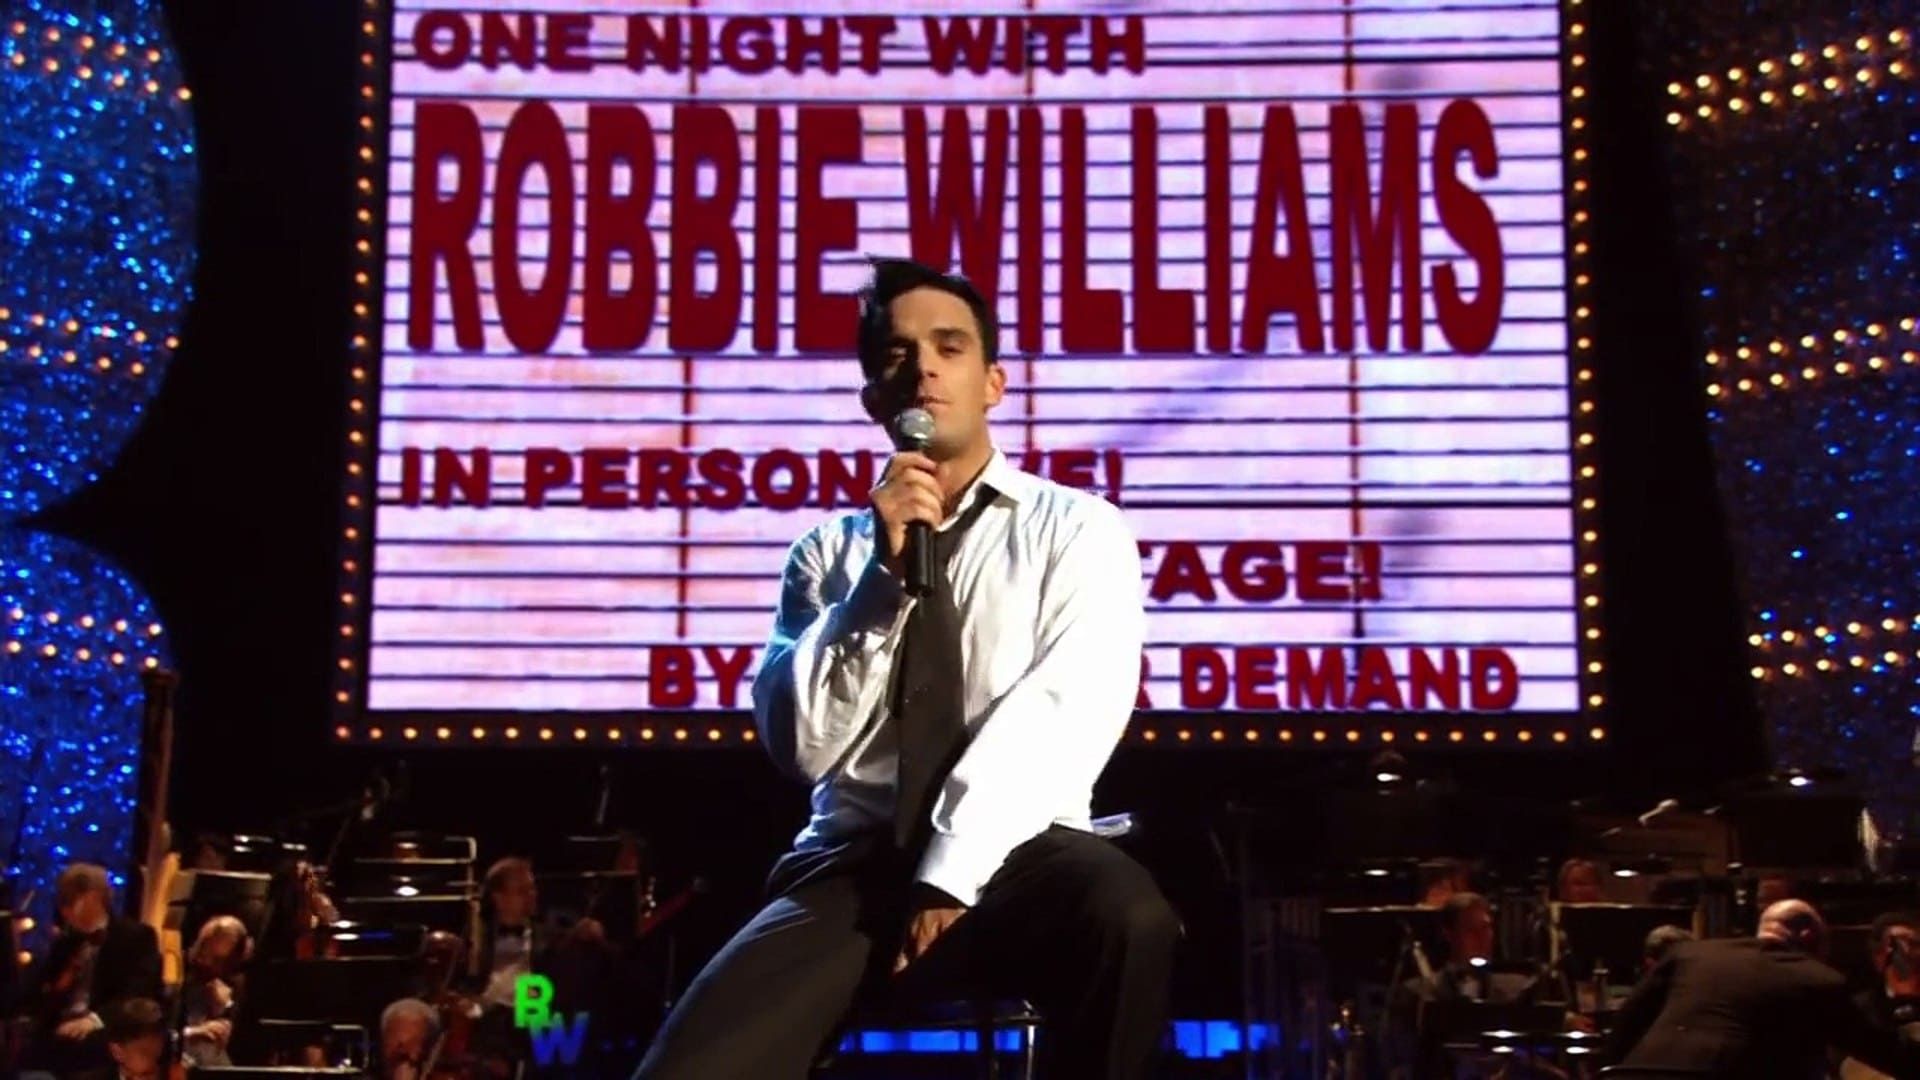 One Night with Robbie Williams background